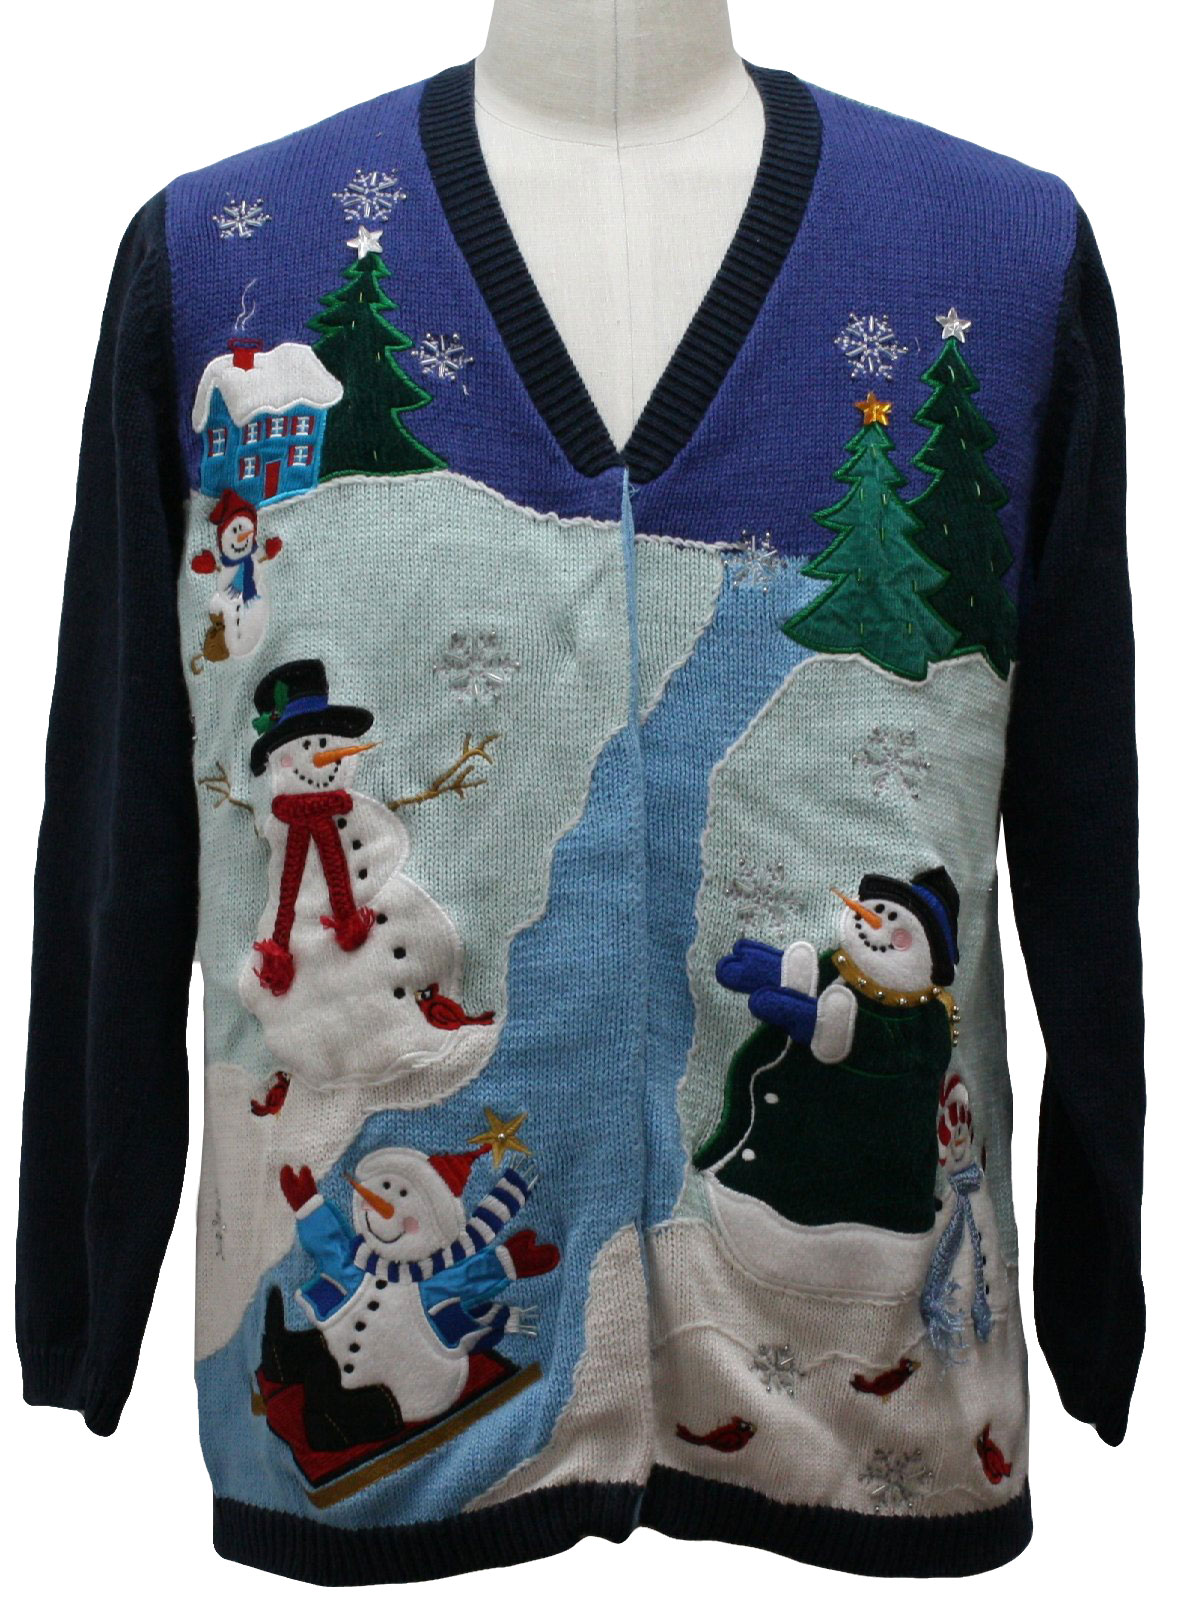 Ugly Christmas Cardigan Sweater: -The Quacker Factory- Unisex navy blue ...